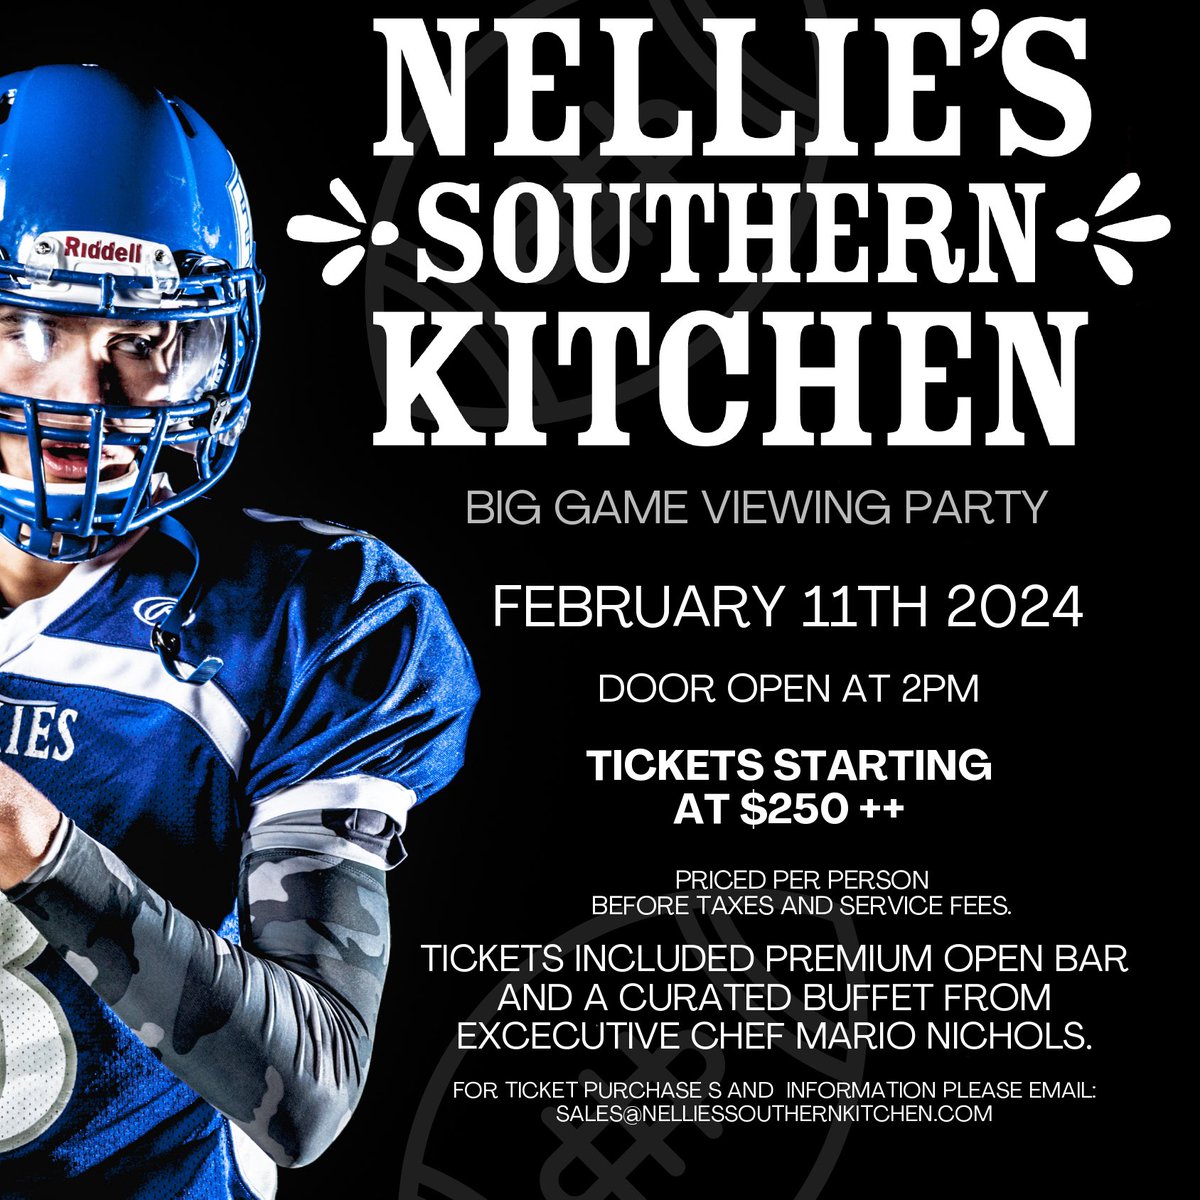 It’s almost time! 🏟️ Join us at NSK Las Vegas as we celebrate the big game 🏈 to purchase tickets email sales@nelliessouthernkitchen.com